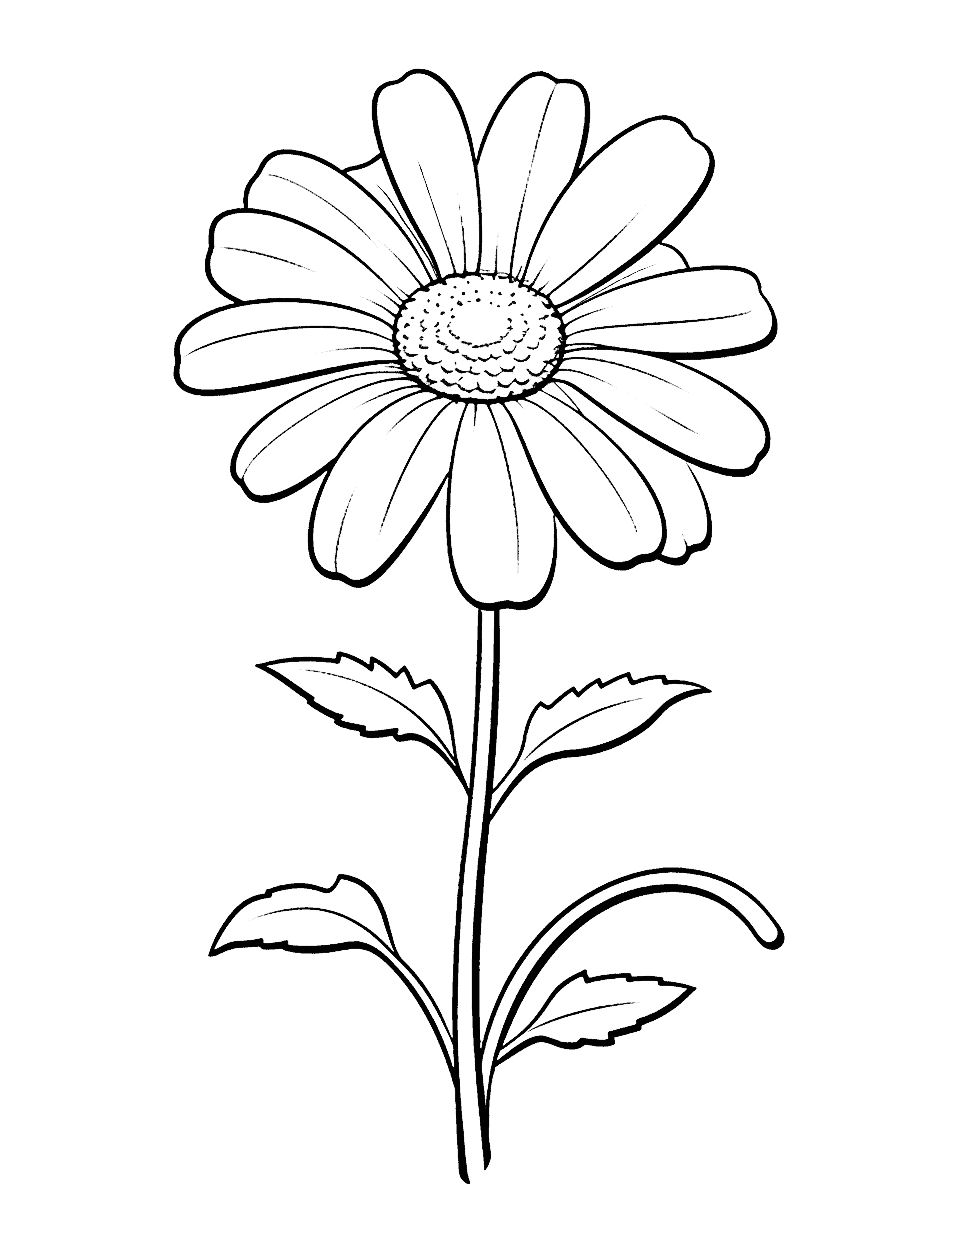 Springtime Daisy Flower Coloring Page - A simple, large daisy coloring page to welcome spring.